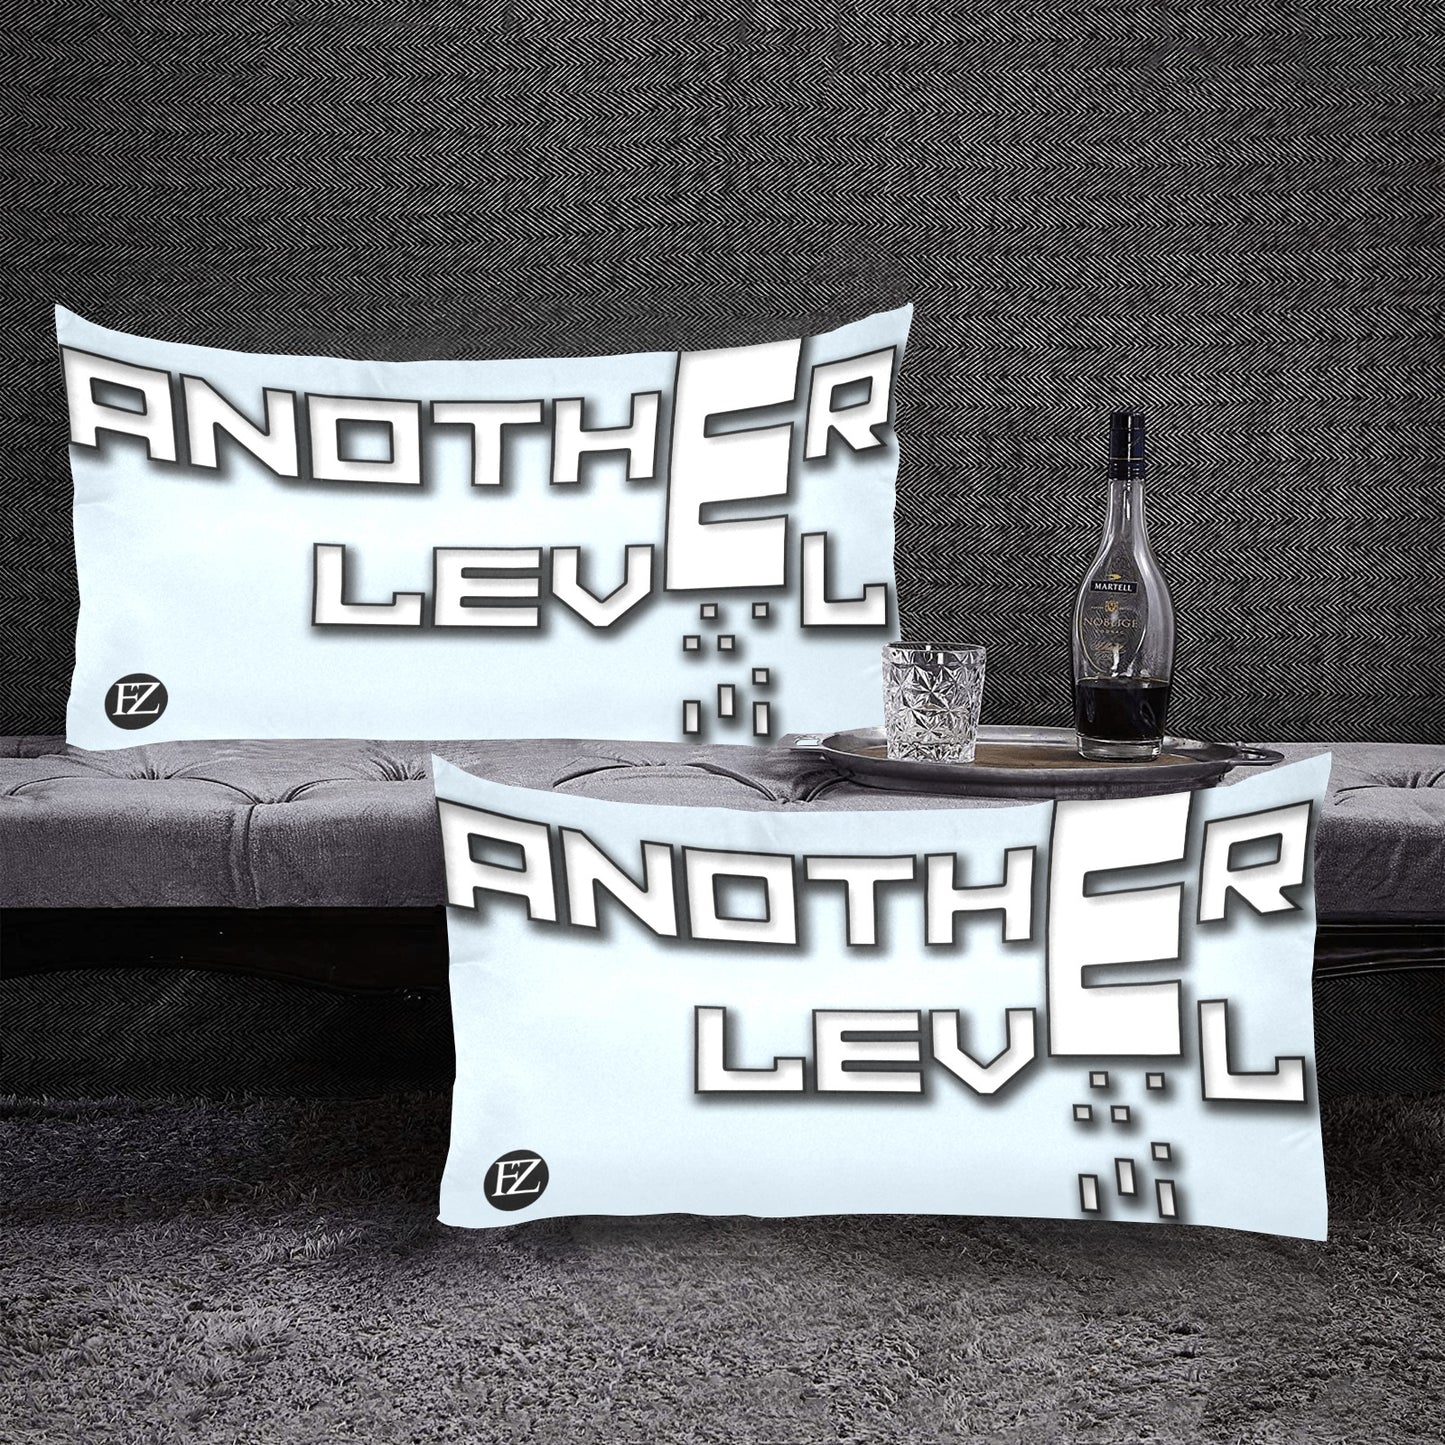 fz levels pillow case one size / fz levels pillow case - blue rectangle pillow cases 20"x36"(one side)(pack of 2)